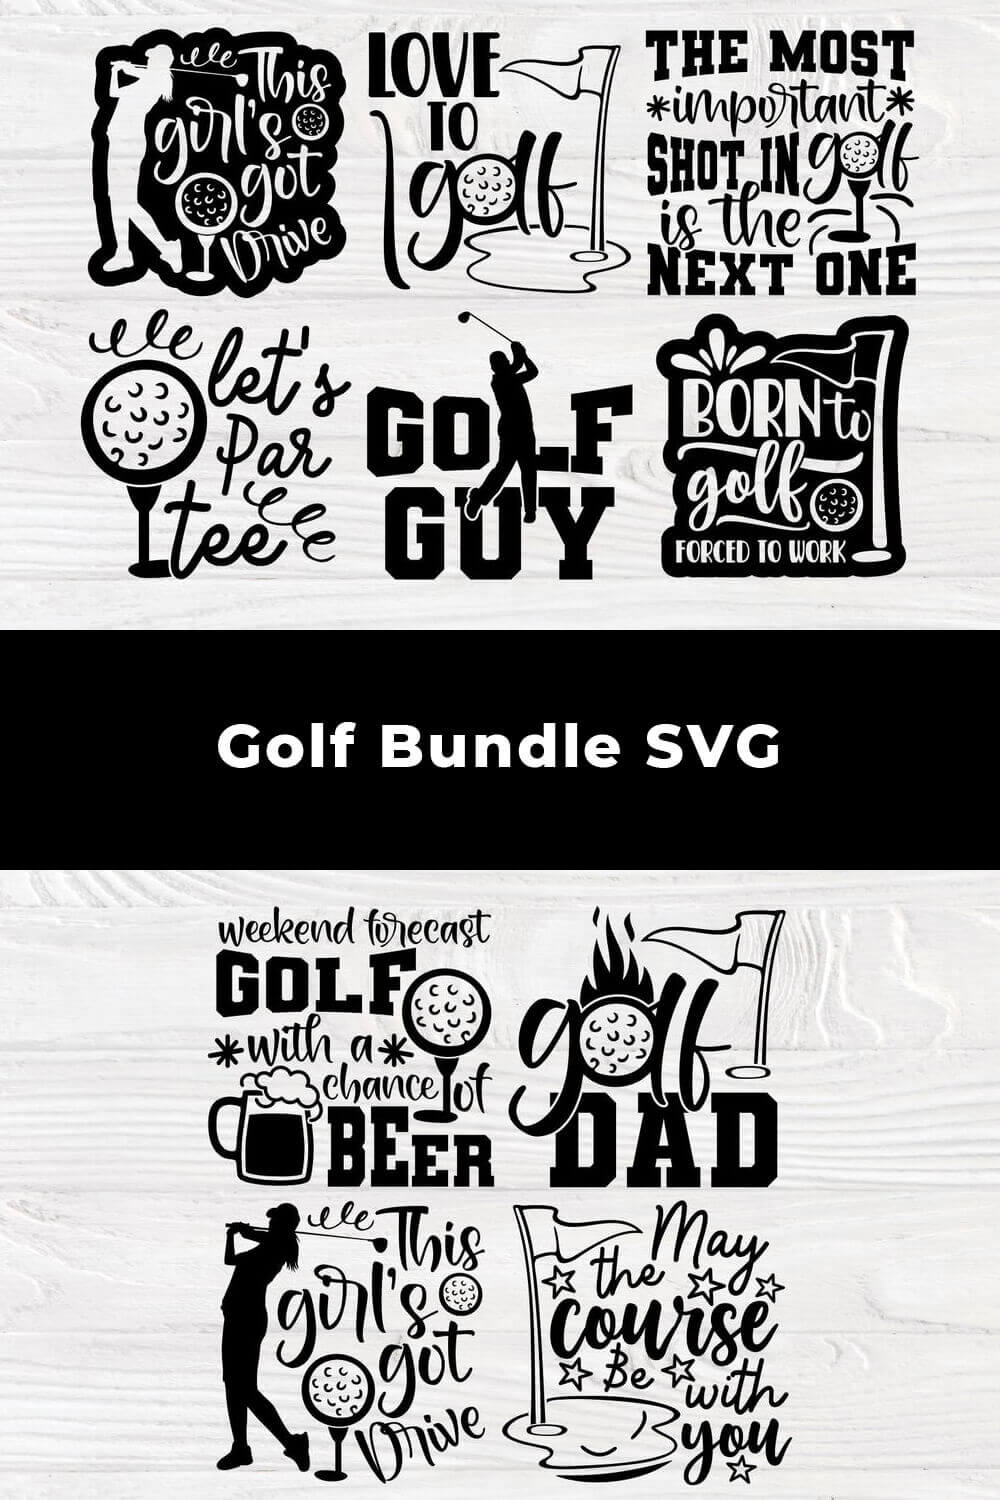 Golf Bundle SVG, picture with golfer for Pinterst.